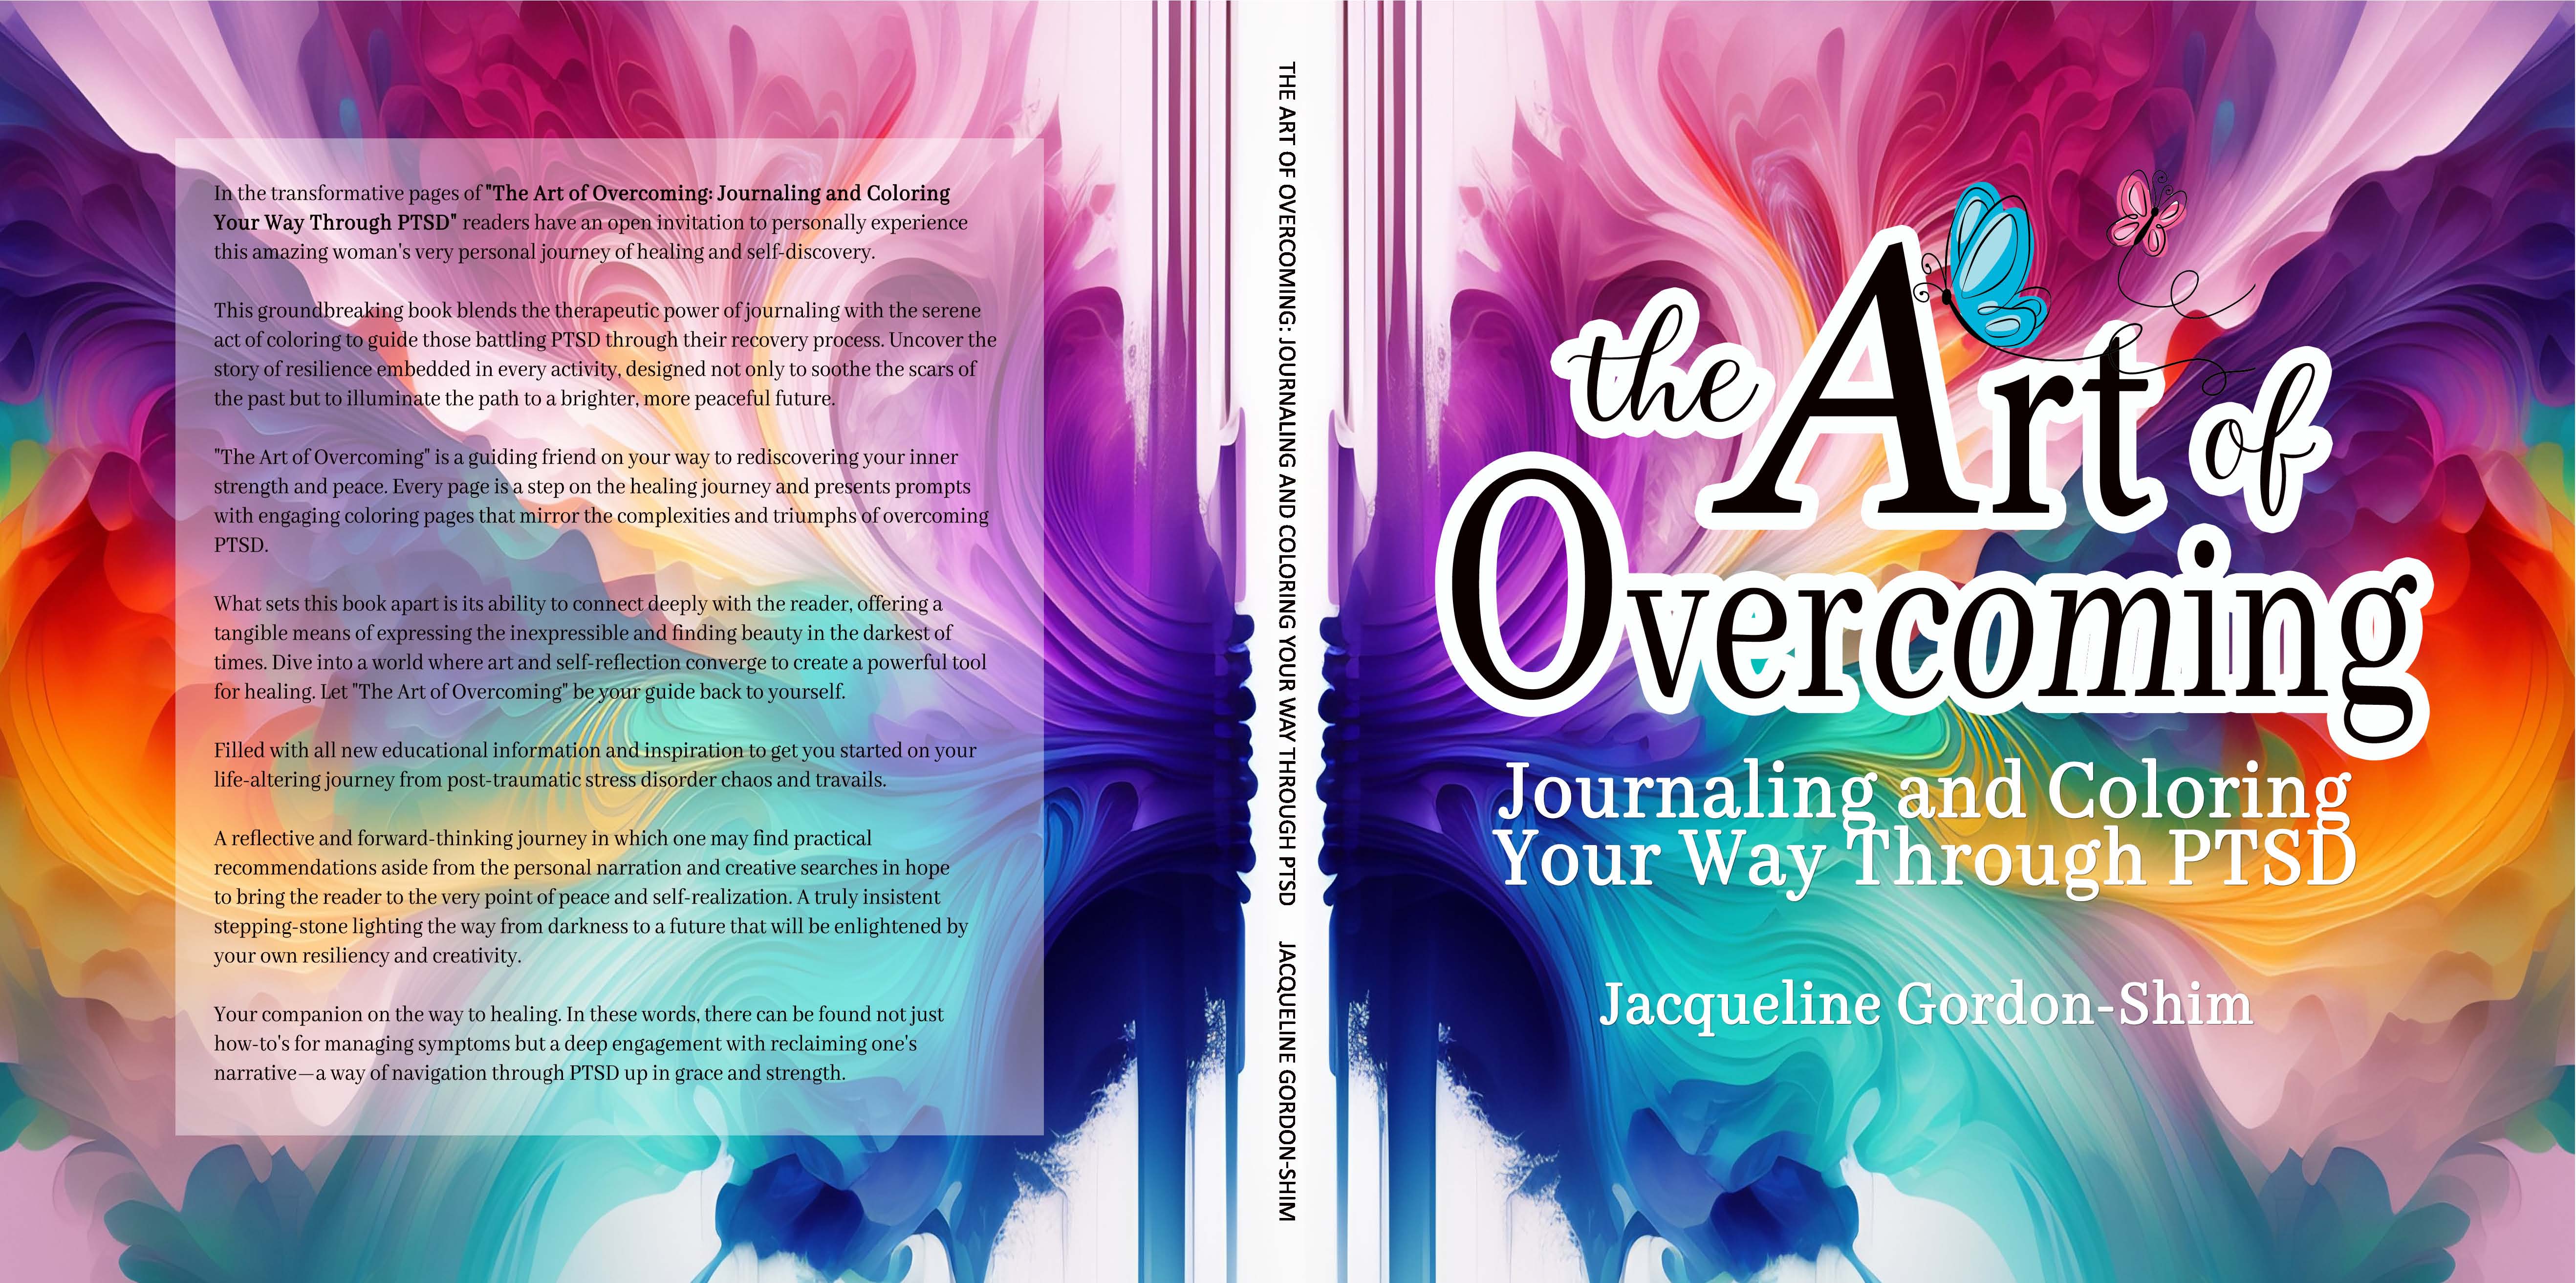 The Art of Overcoming Book Cover